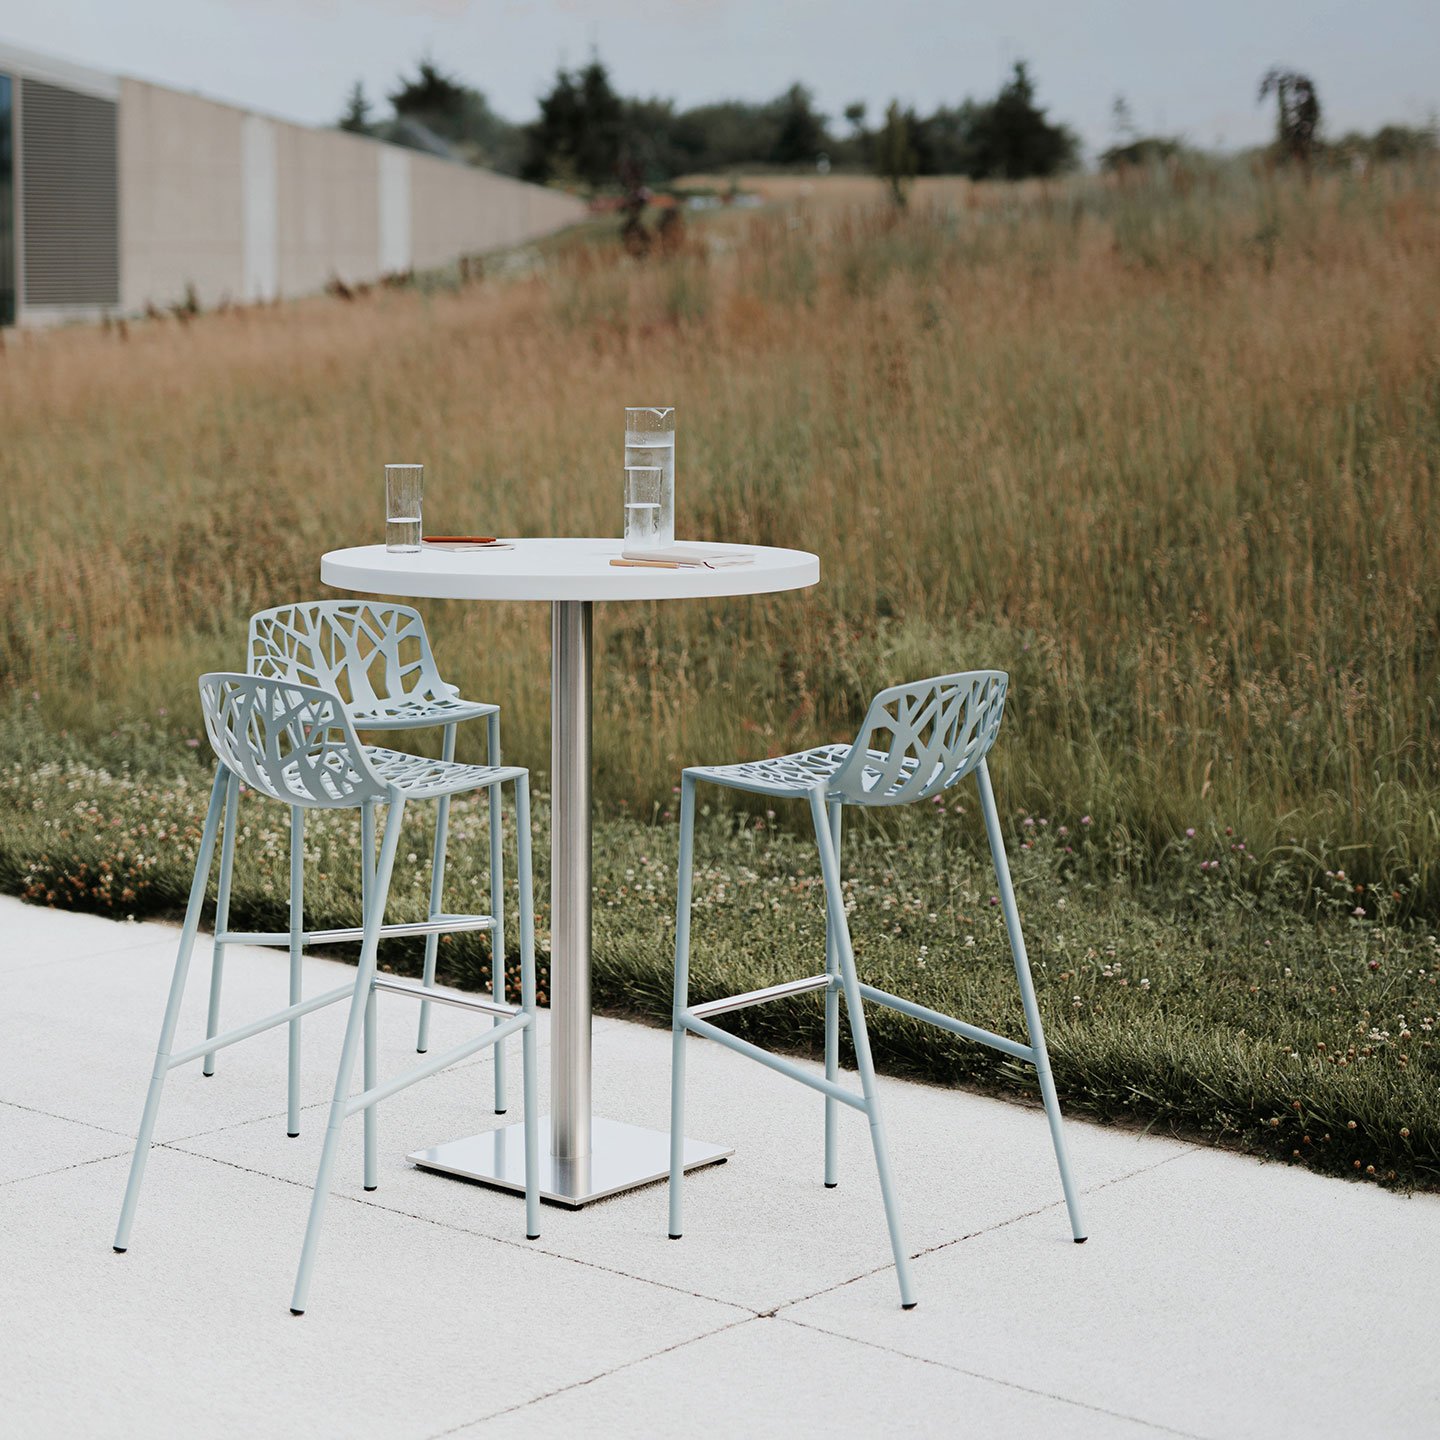 Haworth Forest stools in green in a casual outdoor space by the fields